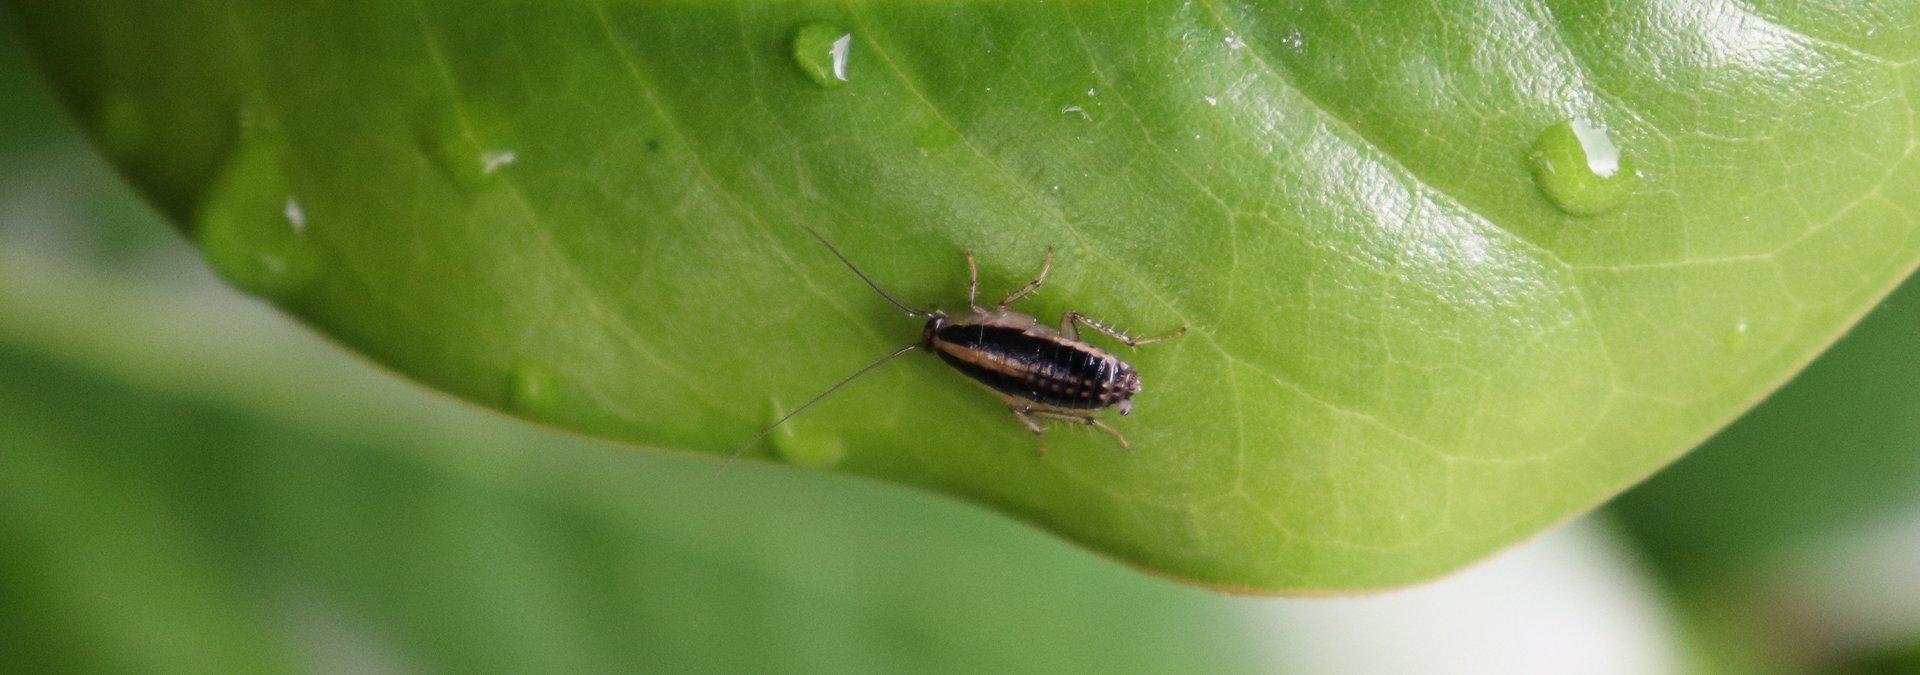 asian cockroach on wet leaves